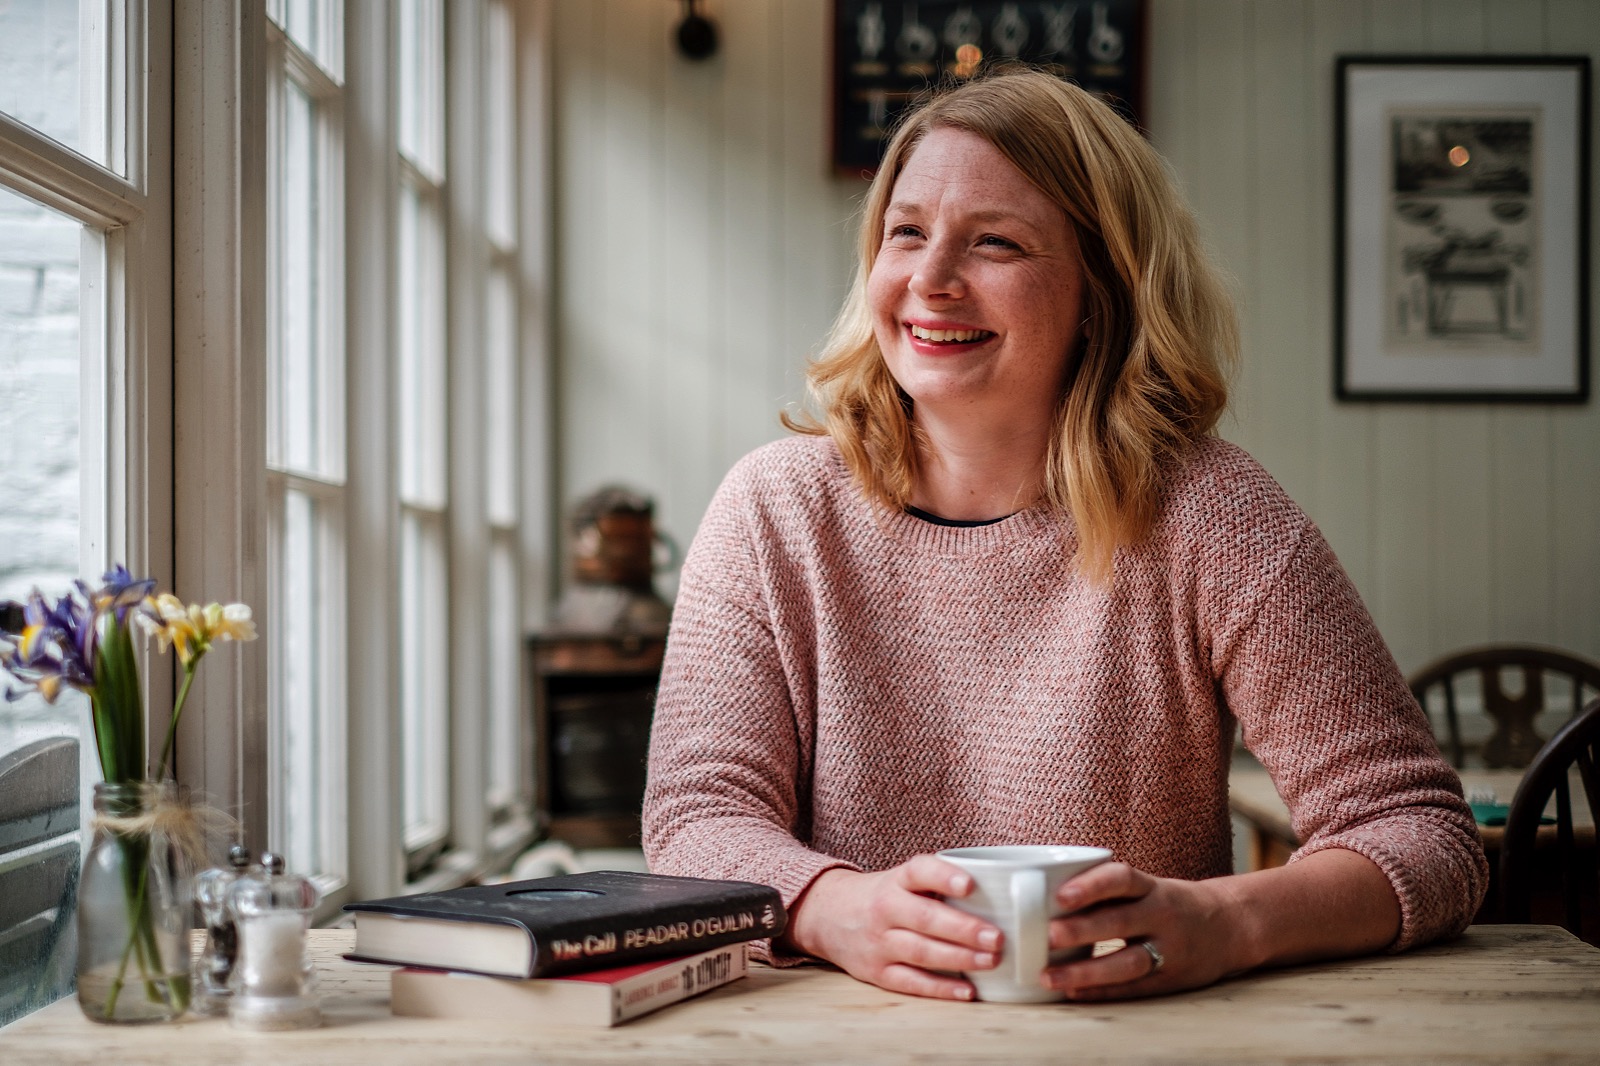 woman smiling and holding mug of coffee during creative corporate headshot session